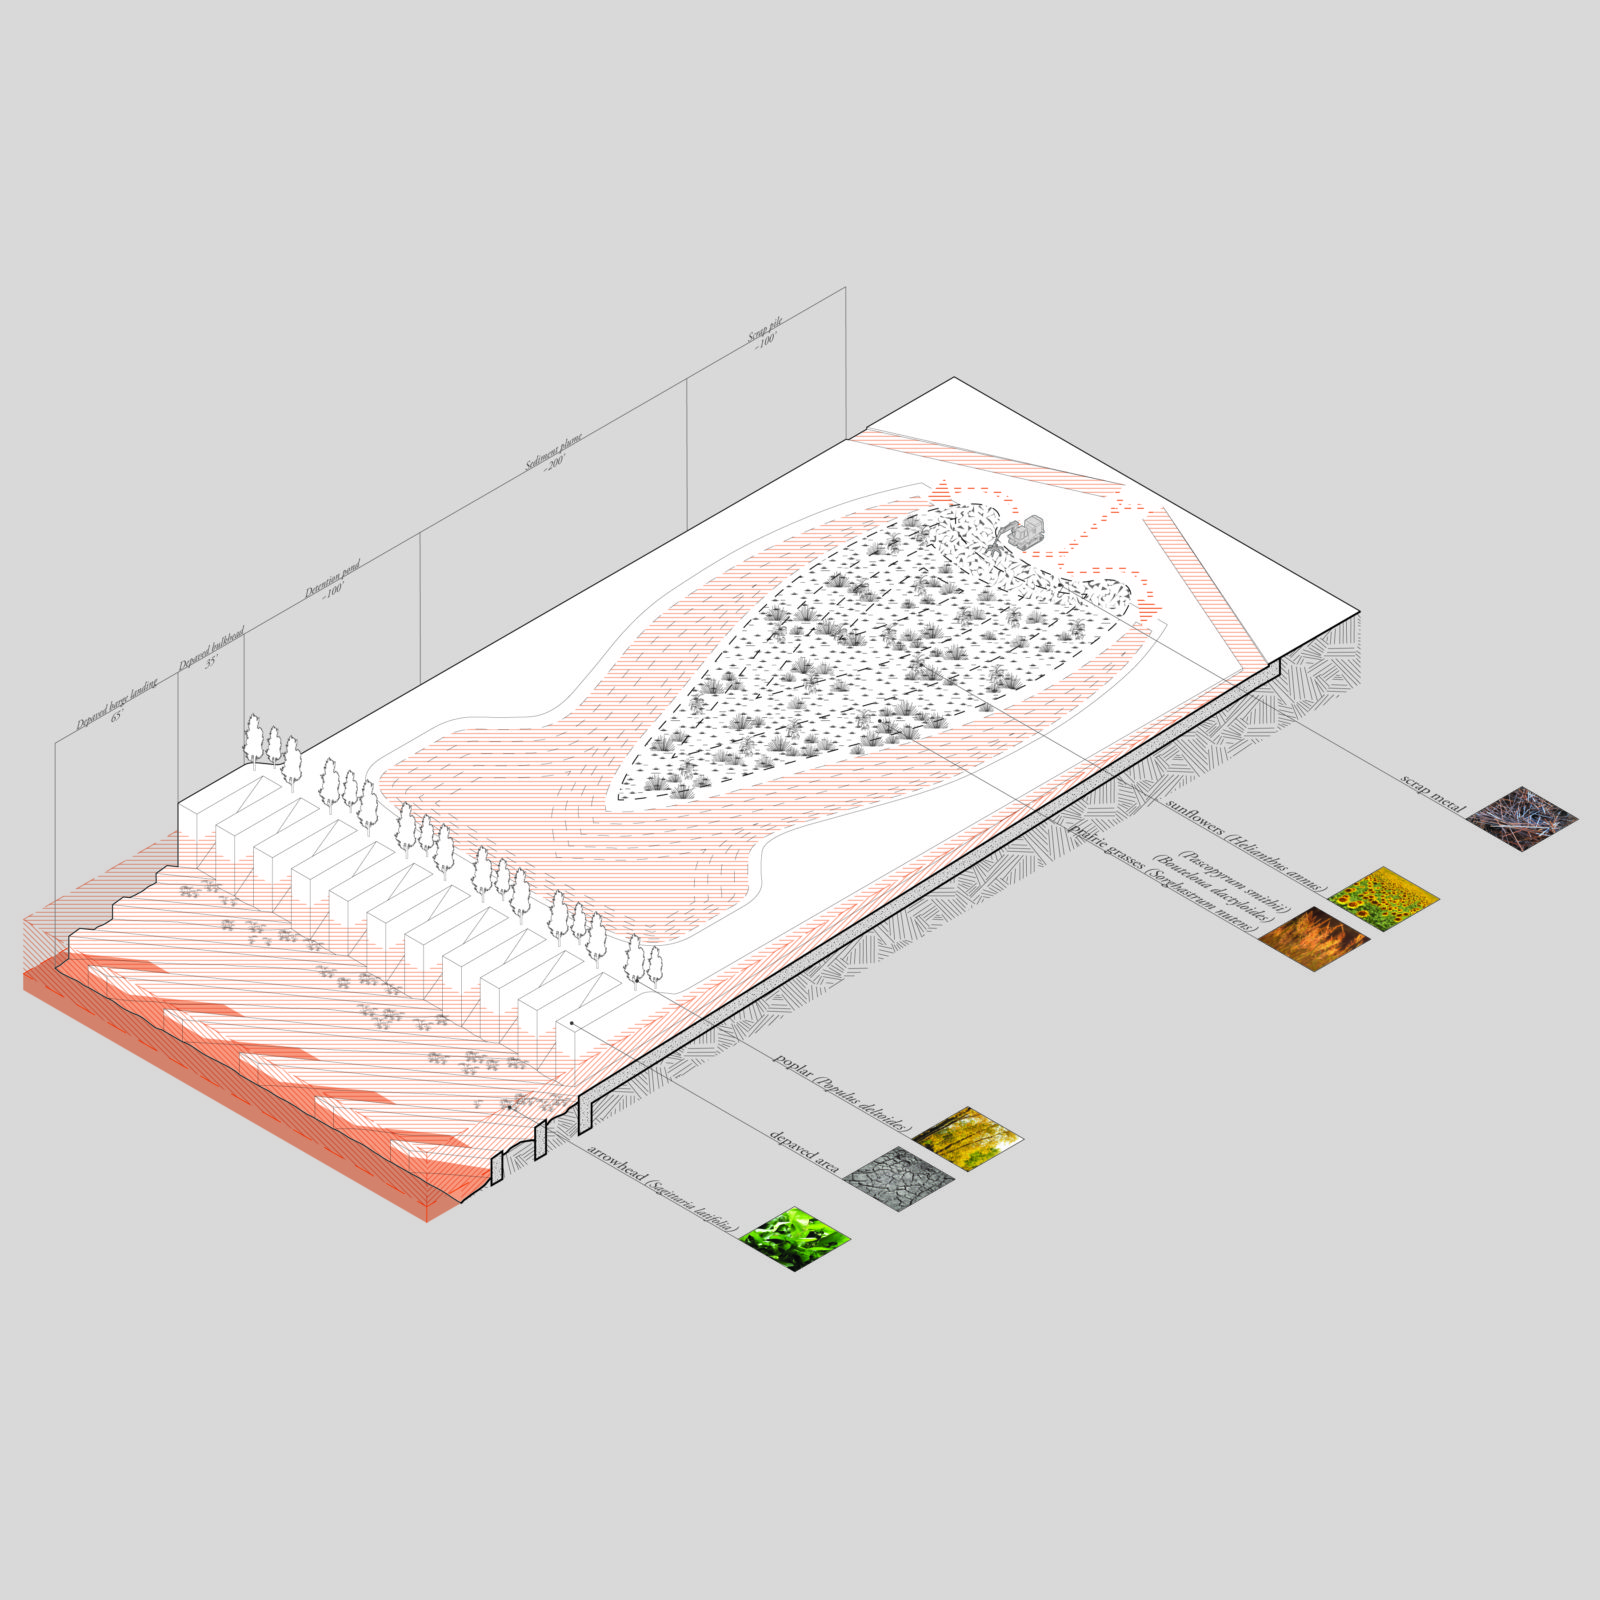 Axonometric view of project rendering by Adam Himes (MAUD '17) and Sophie Juneau (MArch '18), members of the Fall 2016 option studio "Re-tooling Metropolis." Image courtesy Adam Himes and Sophie Juneau.